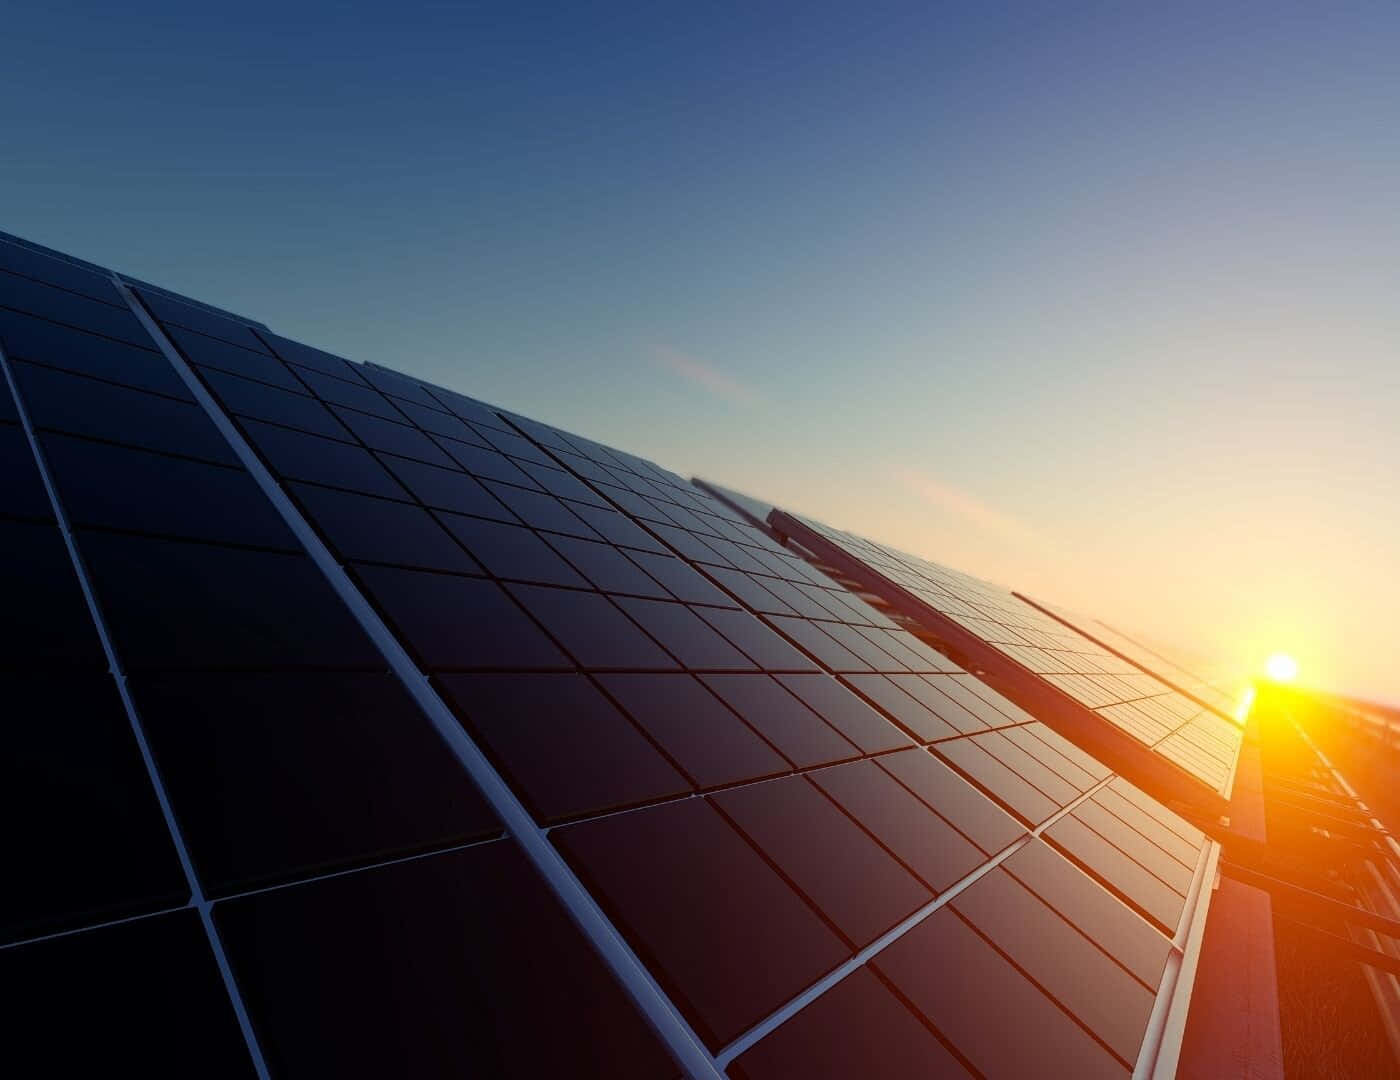 Renewable Energy Solar Panels And Sunset Picture